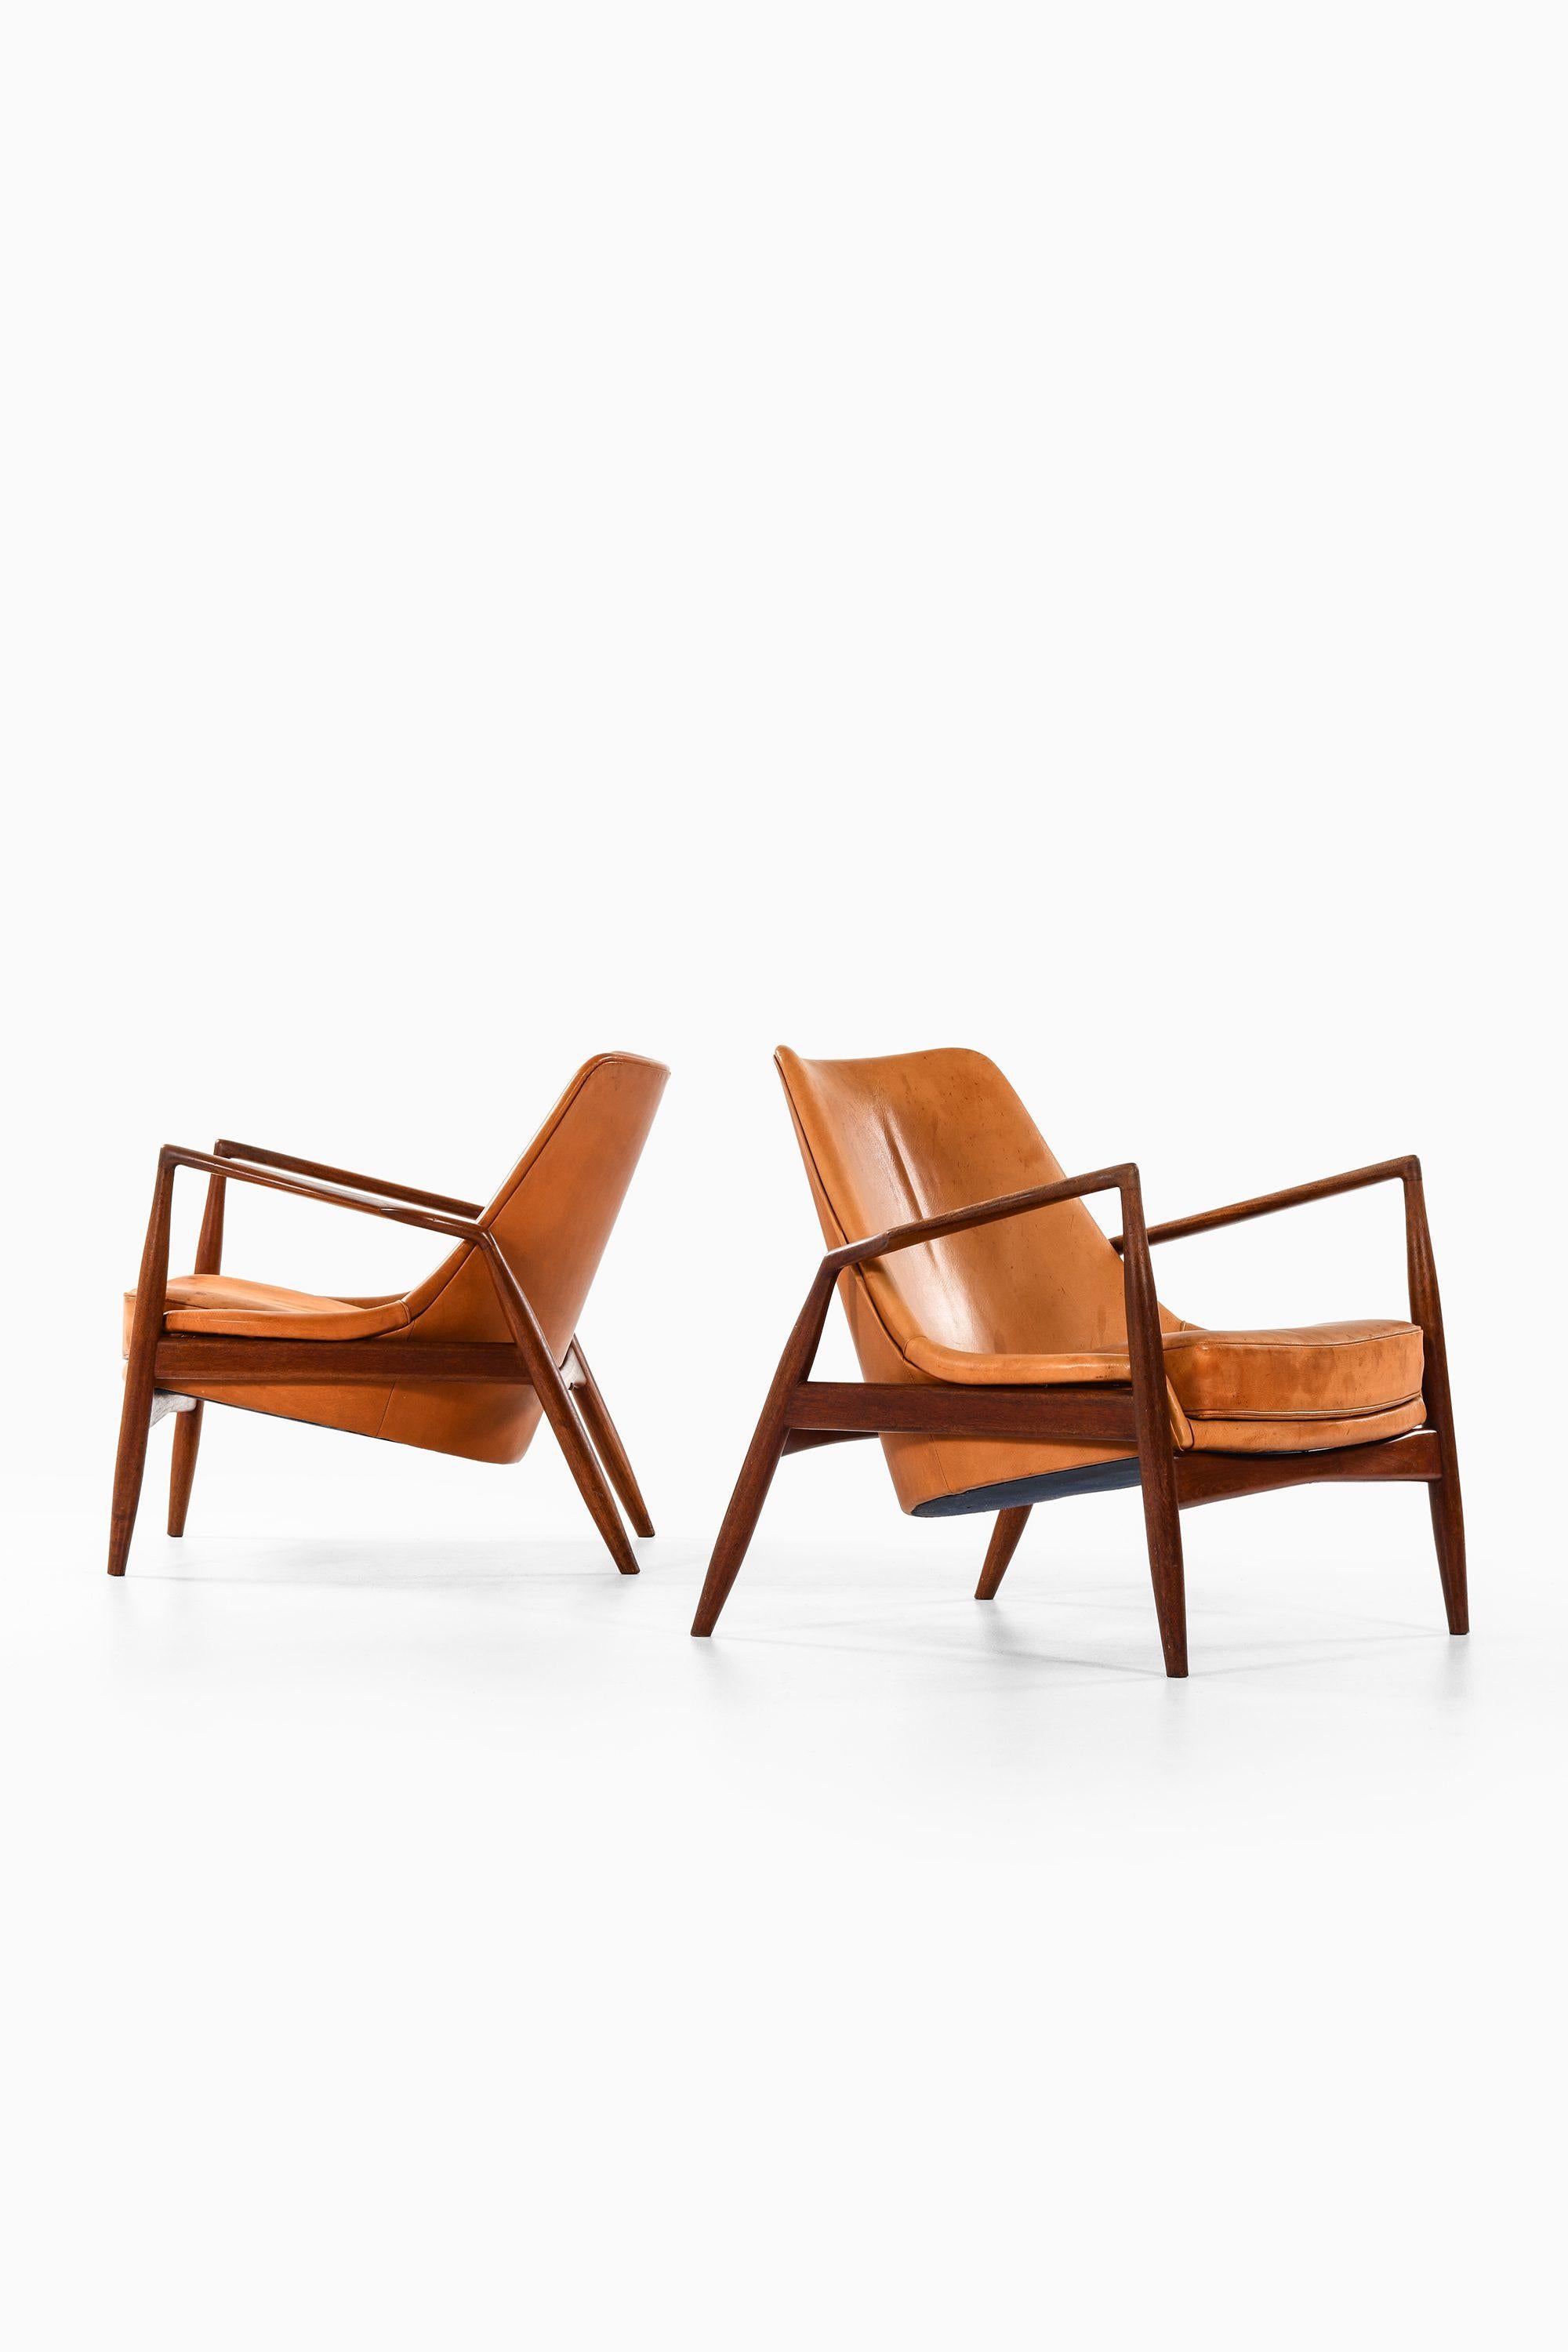 Swedish Pair of Easy Chairs in Teak and Leather by Ib Kofod-Larsen, 1950s For Sale